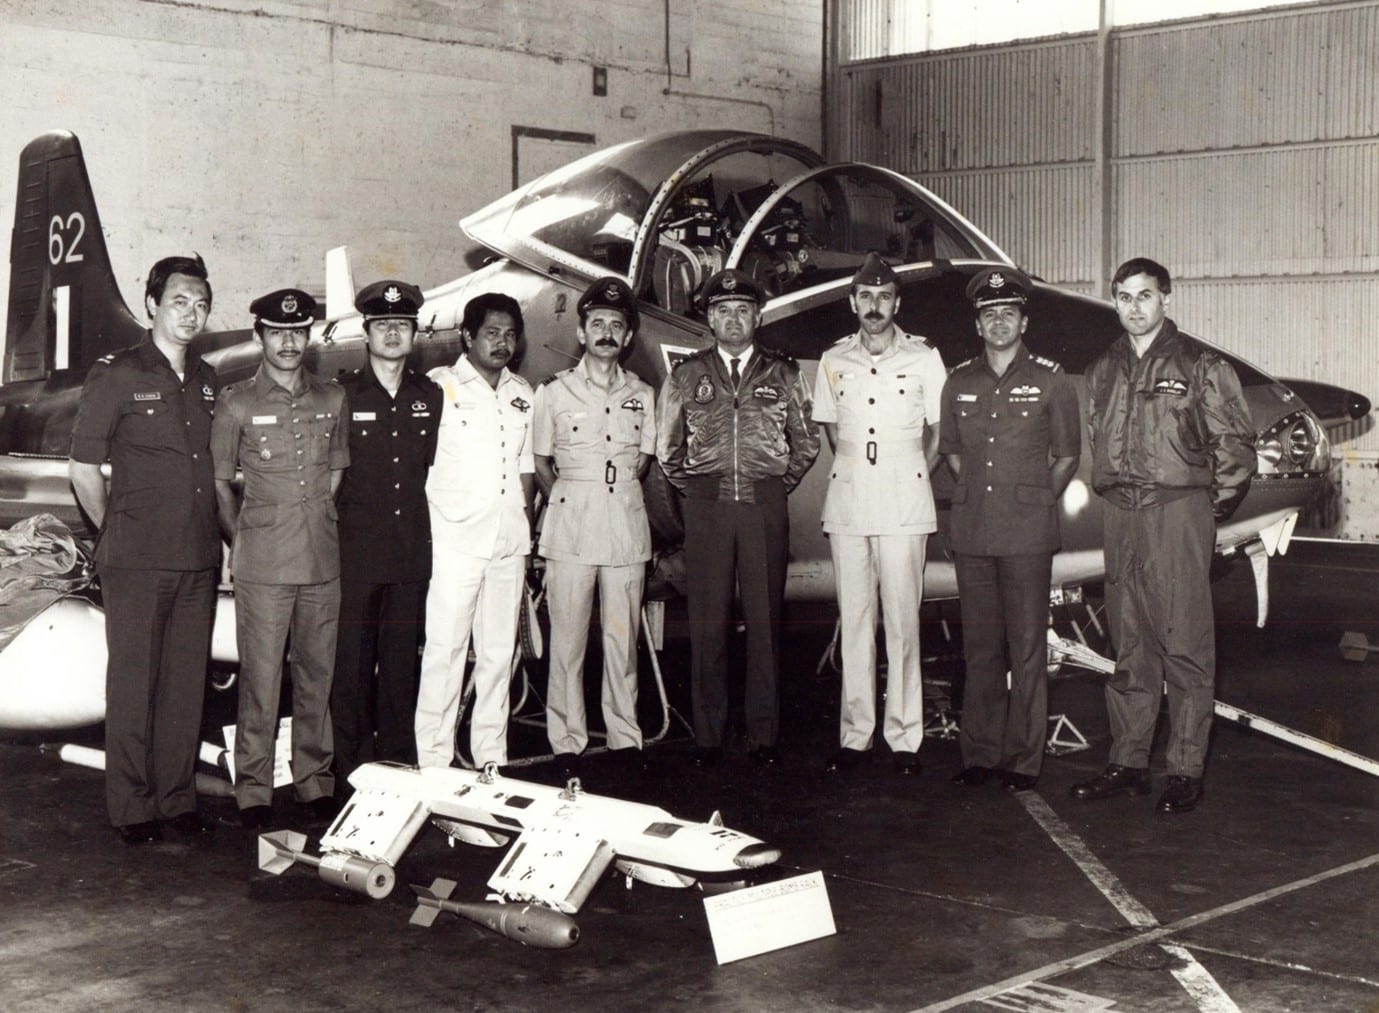 Ohakea 24 Nov 82 – Visit to 14 Sqn by AVM Symmonds RAAF, Commander IADS, and IADS staff officers. Left to R - Maj Chew RSAF, Mej Sofian Malaysian Army, Maj Mike Chuan RSAF Staff Officer (SO) Sams, Maj Bashir RMAF SO Fighters, Wg Cdr Dave Light RAF Snr Off Air Defence, AVM Symmonds RAAF, Sqn Ldr Derick Dunton RAF SO Control & Reporting, Col Tim Desouza RSAF SASO IADS, Sqn Ldr Jim Barclay CO 14 Sqn – photo RNZAF Ohakea G3308/82. In front of the visiting party is a Practice Multiple Bomb Release (PMBR) carrier that is fitted underwing to a SMR to enable the carriage of MK106 HDB and BDU33 SDB practice bombs – the two practice bombs are seen affixed to the PMBR, with the MK 106 on the rear station, and BDU33 on the front.